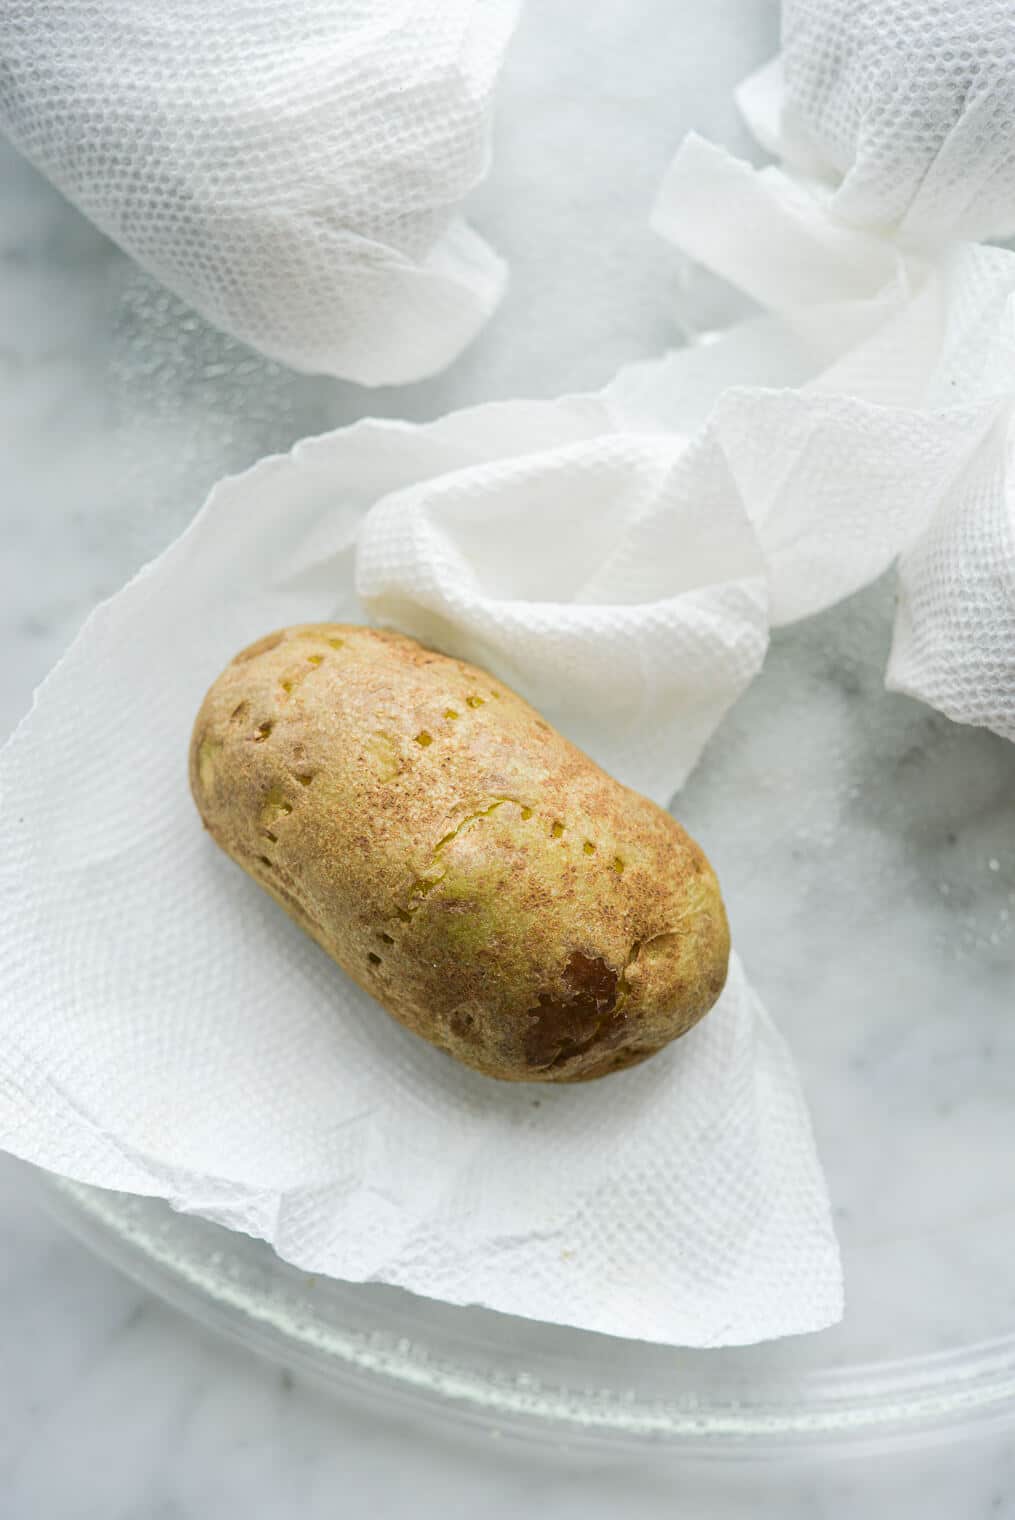 potatoes being wrapped in damp paper towels before going into the microwave